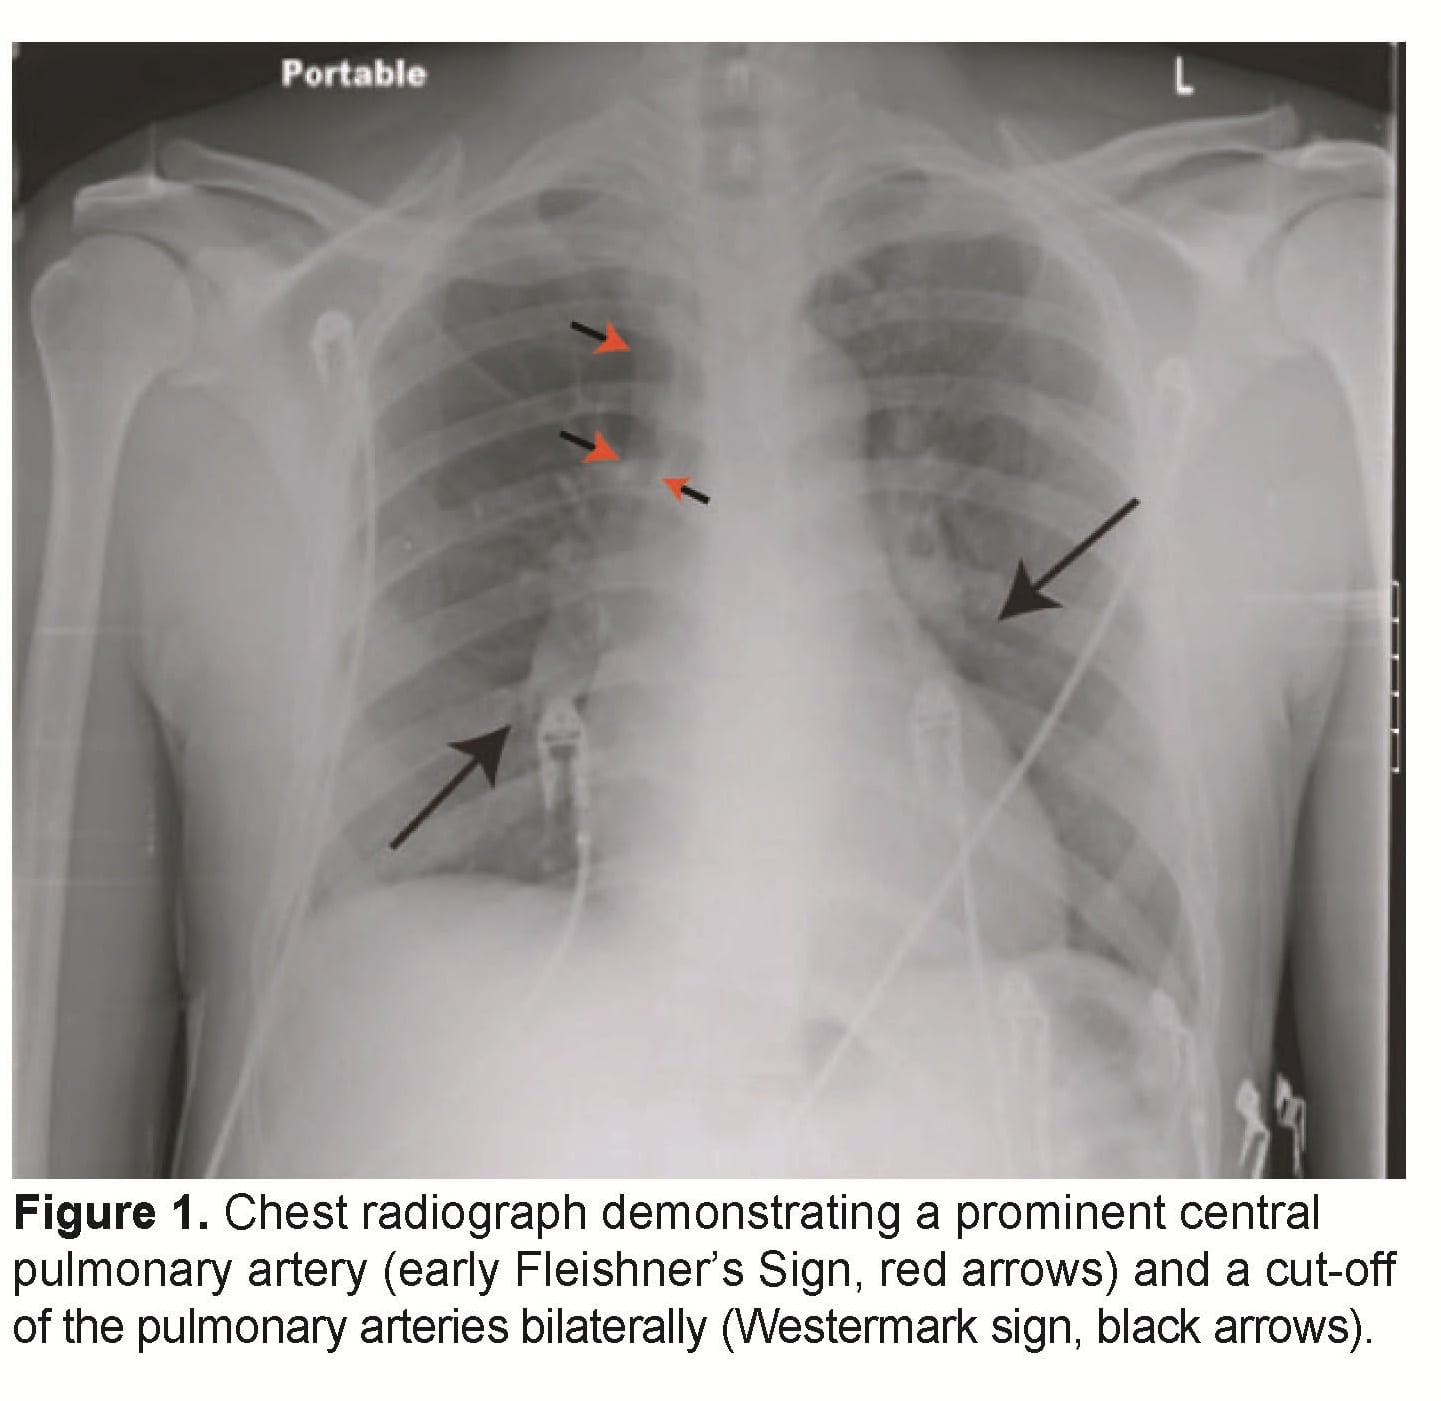 Persistent Hiccups as a Rare Presenting Symptom of Pulmonary Embolism